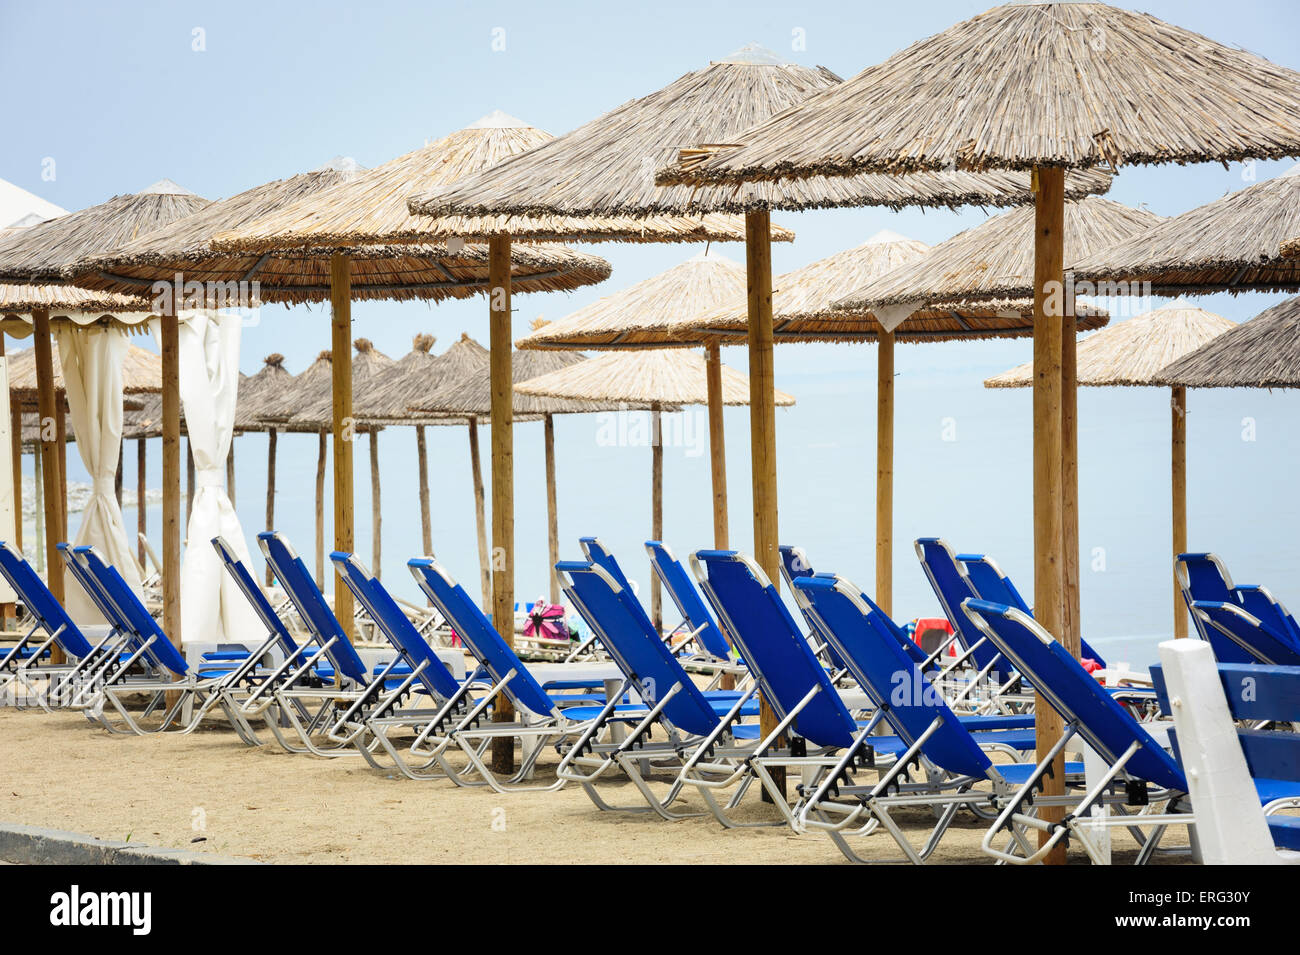 Reed umbrellas and deck chairs at the beach Stock Photo